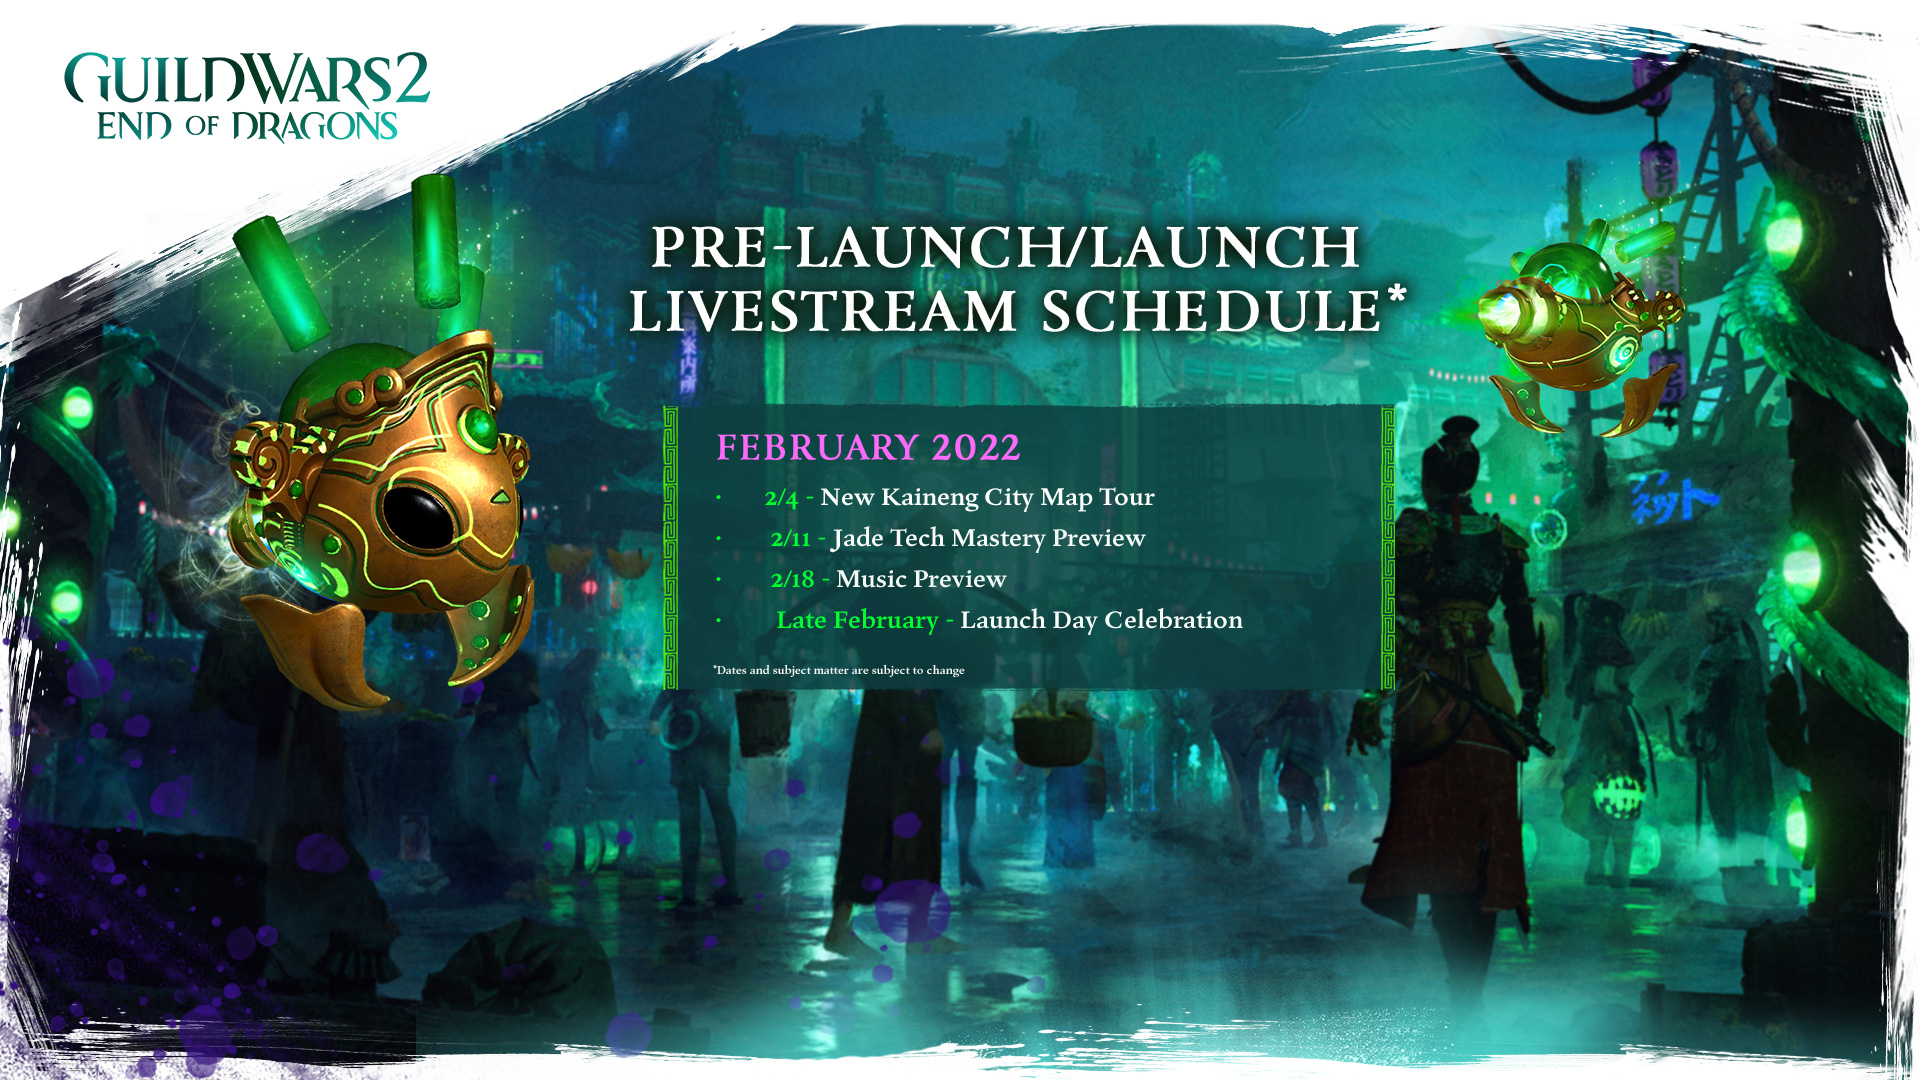 Guild Wars 2 Release Launch Schedule for End of Dragons 7